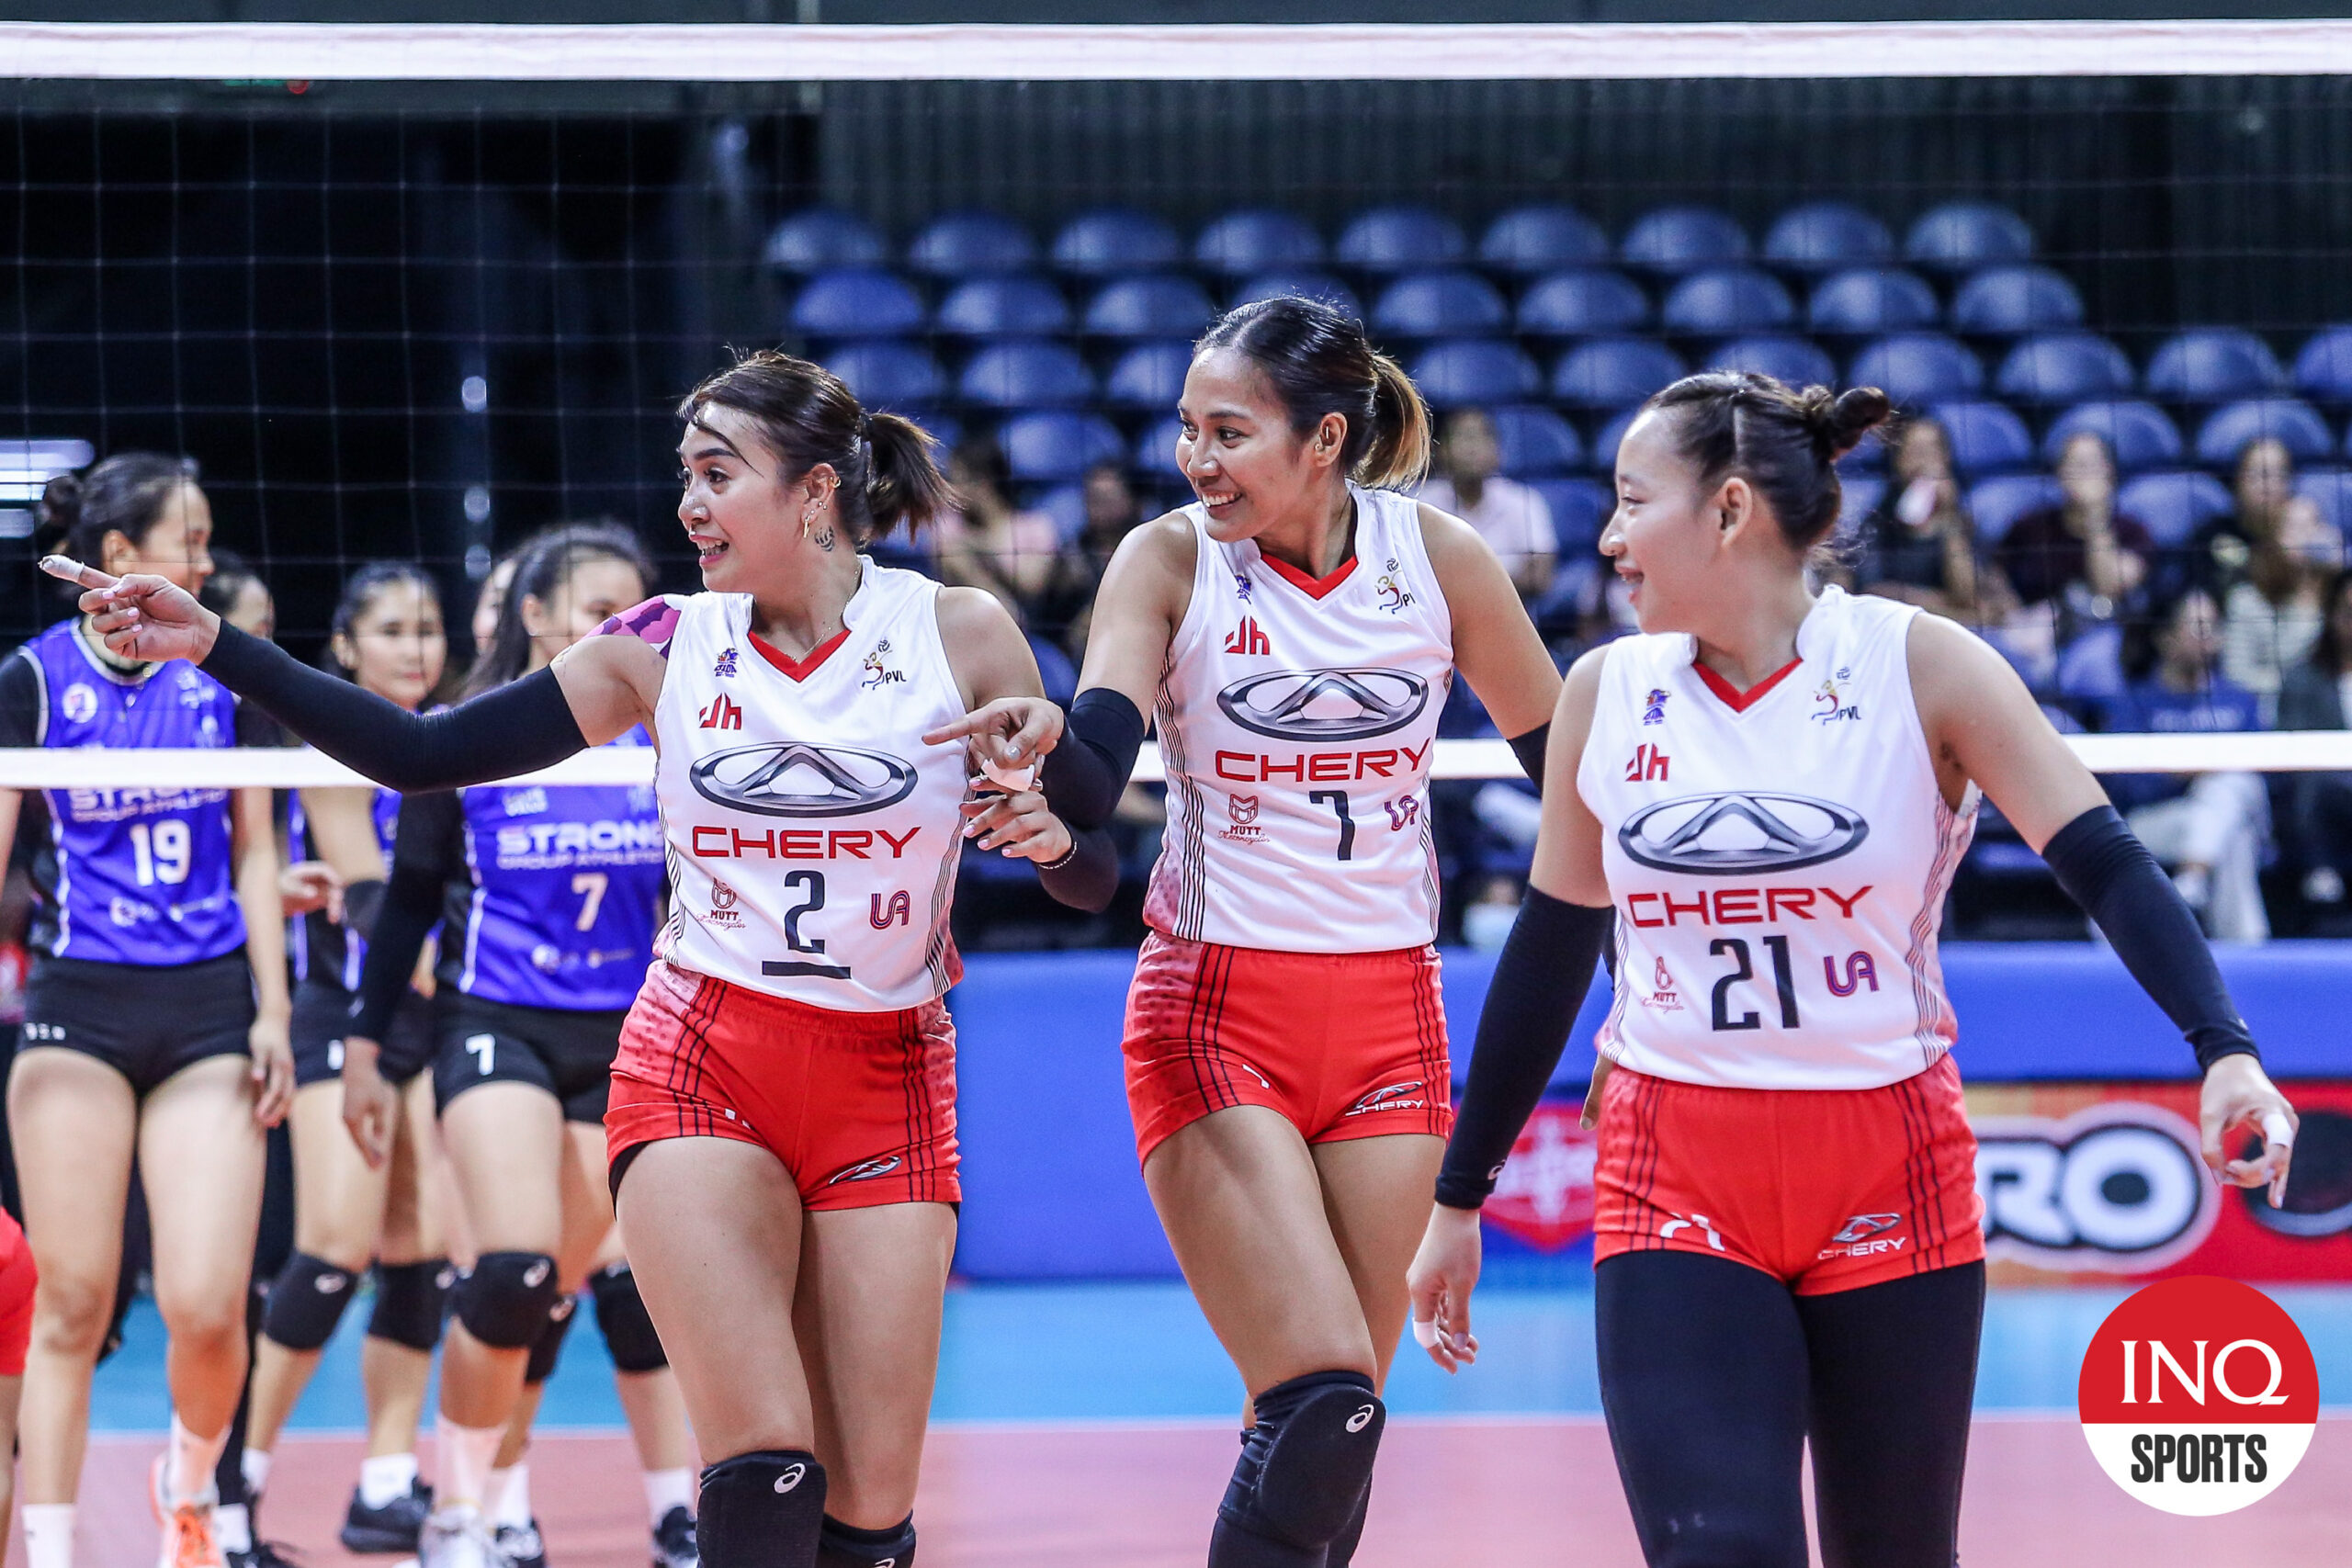 pvl: bestfriends aby maraño, mylene paat get boost from playing together